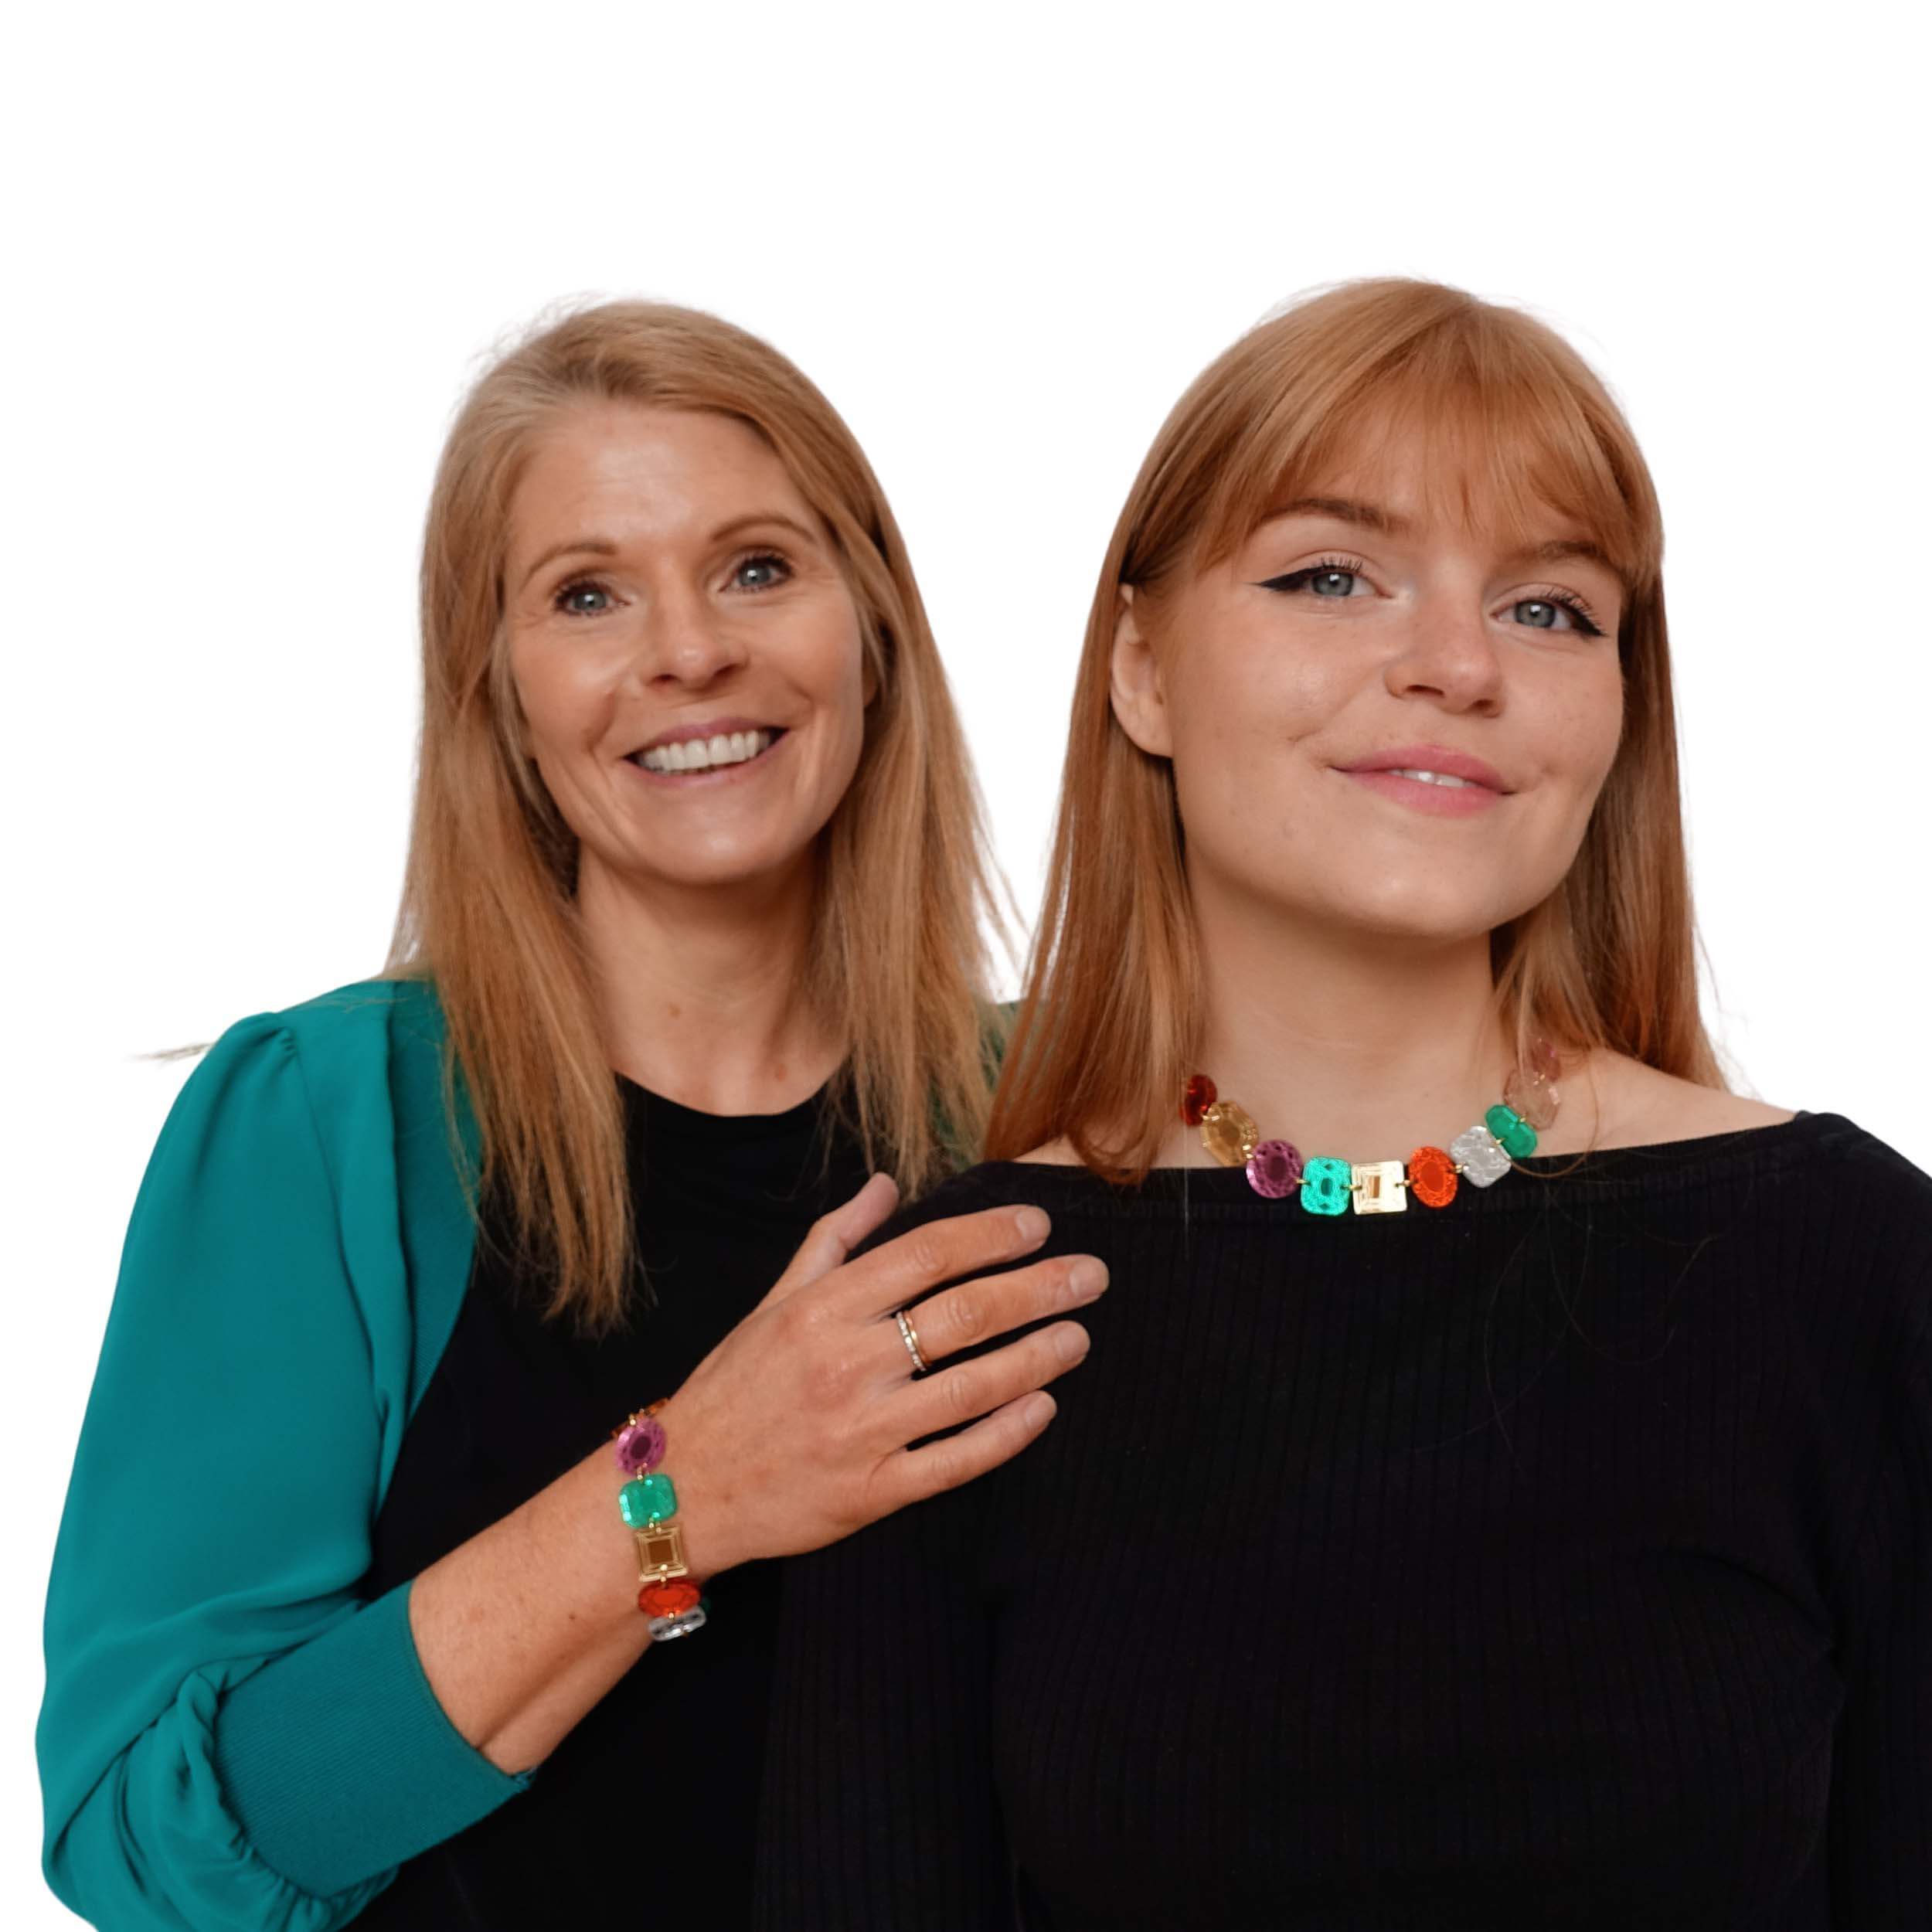 Sarah wears the Funky Jewel bracelet while Eliza, her daughter, wears the Funky Jewel choker. Both designed by Sarah as part of the Austerity Jewels collection for Wear and Resist. 